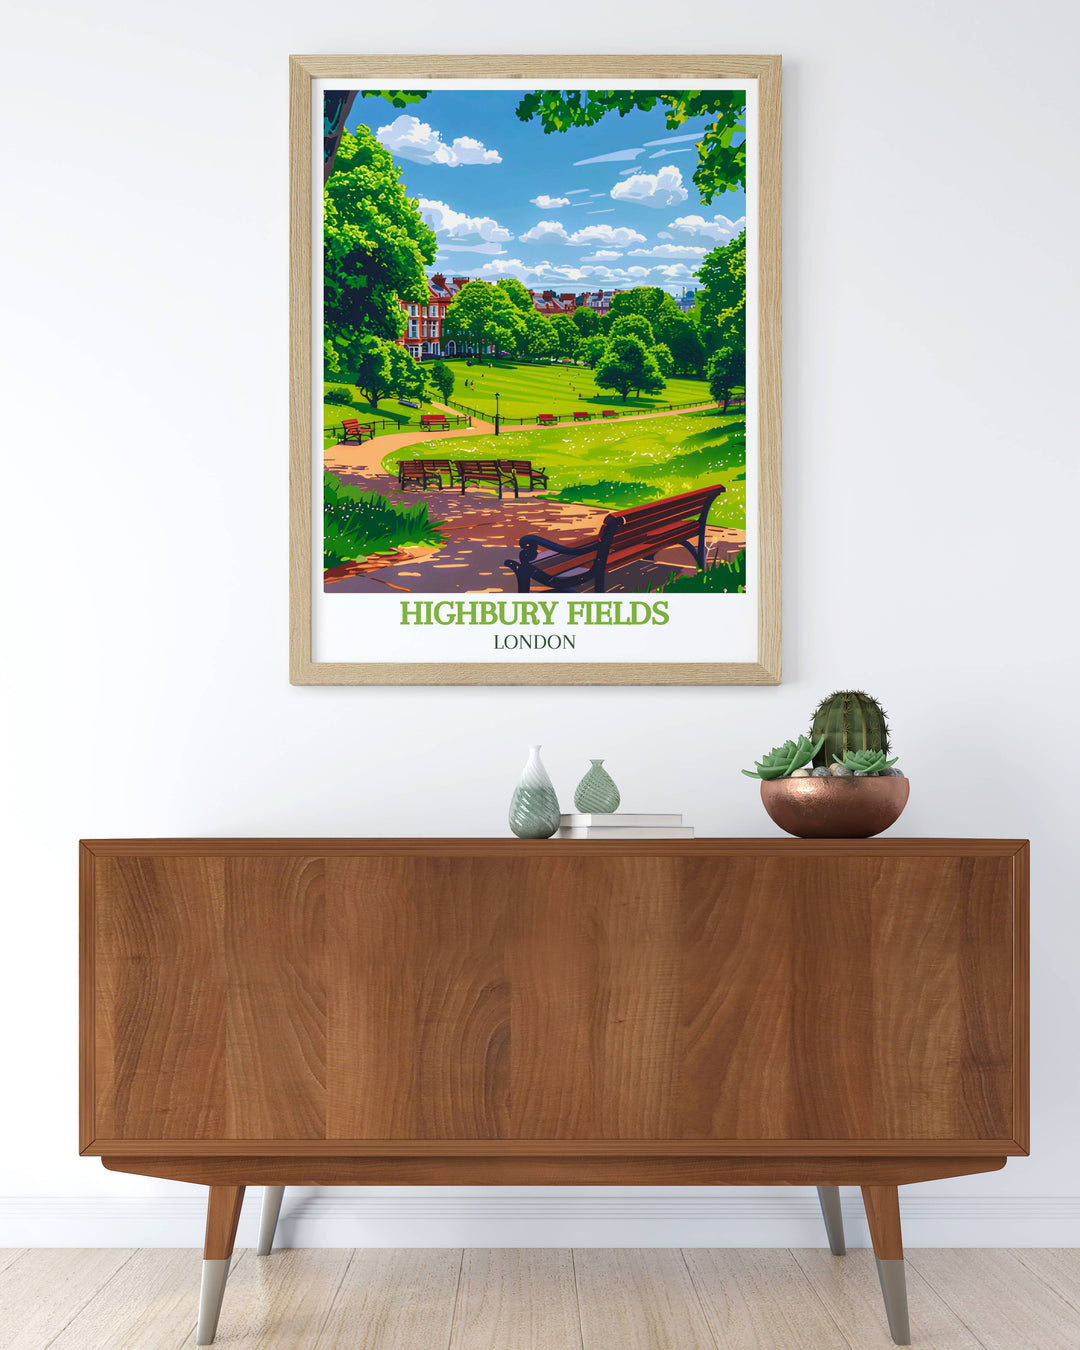 Gallery wall art featuring a panoramic view of Highbury Fields, capturing the essence of this popular London park